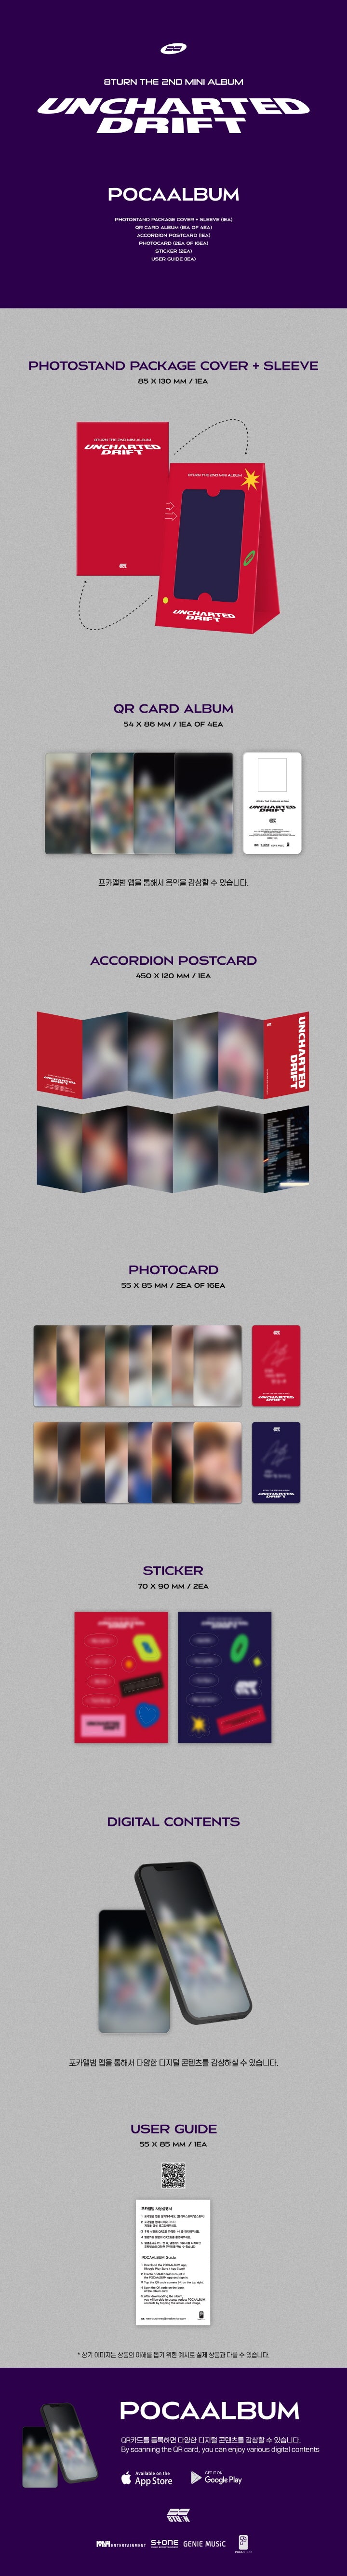 1 QR Card Album (random out of 4 types)
1 Photo Stand Package Cover + Sleeve
1 Accordion Postcard
2 Photo Cards (random ou...